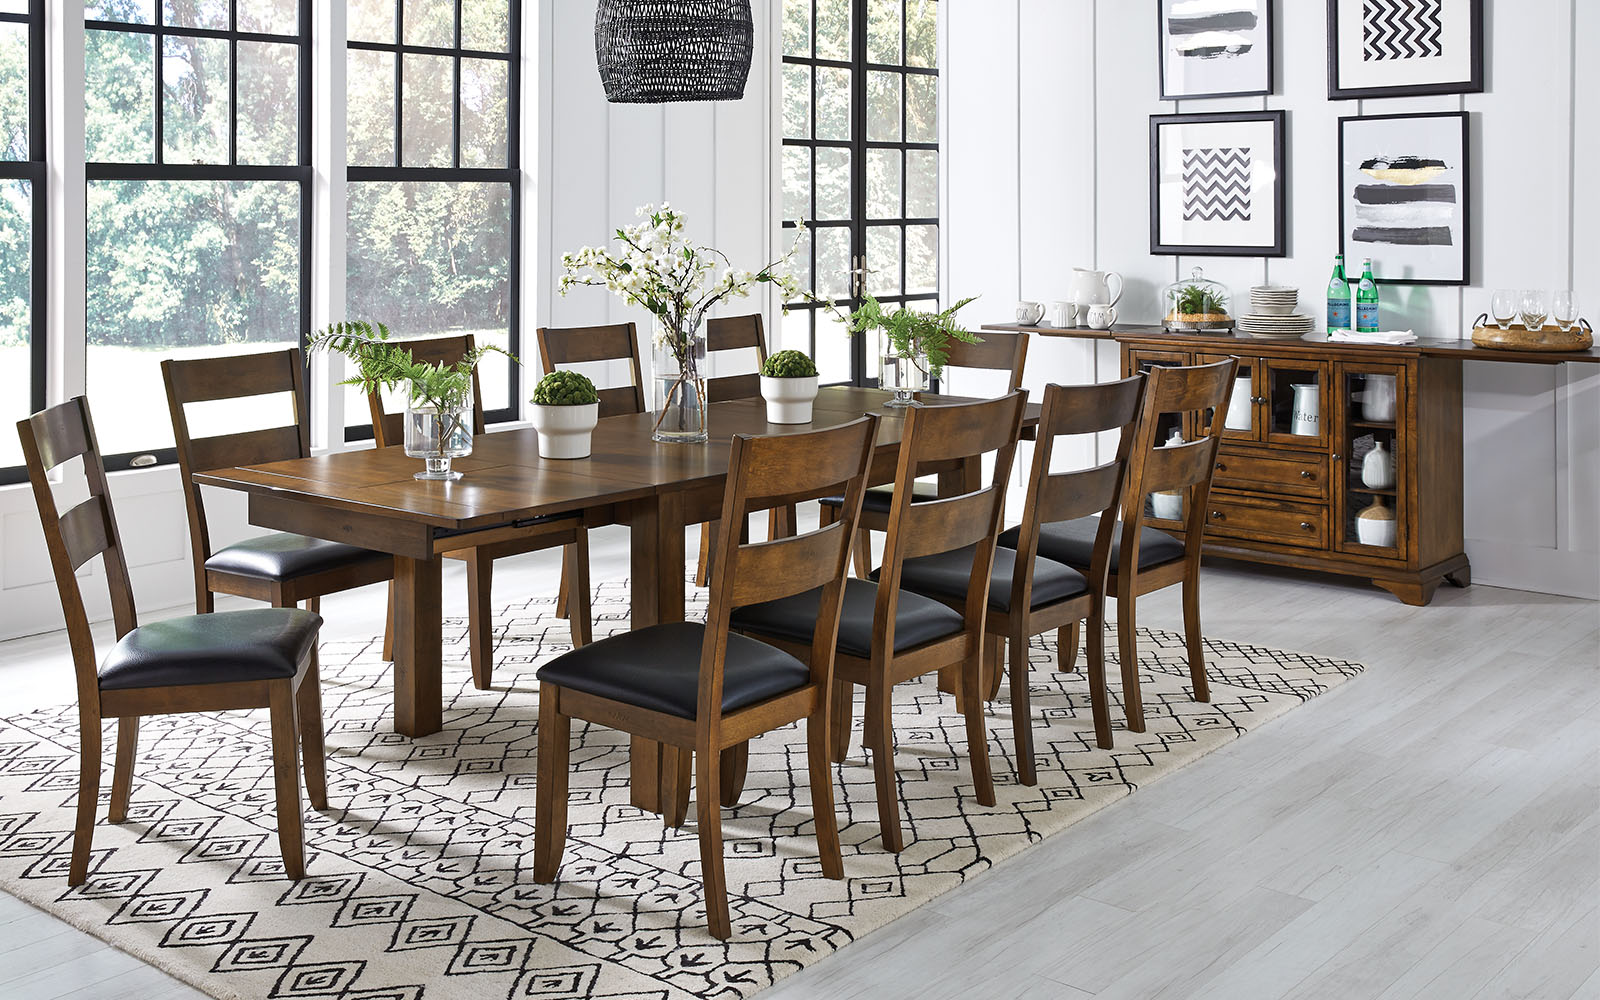 Real Wood Dining Table Style Guide